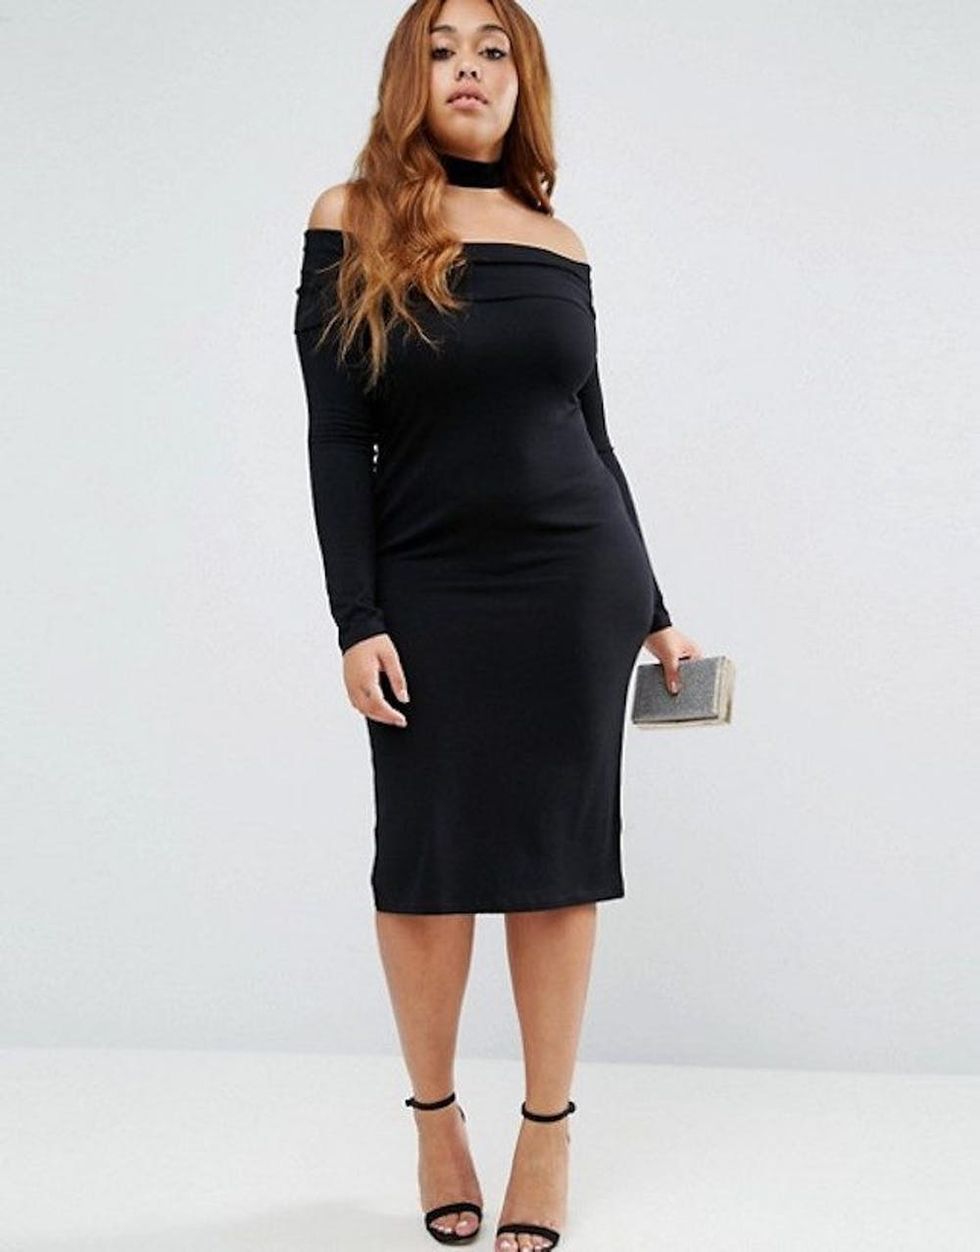 21 Plus-Size Essentials That’ll Reinvent Your Style in 2017 - Brit + Co